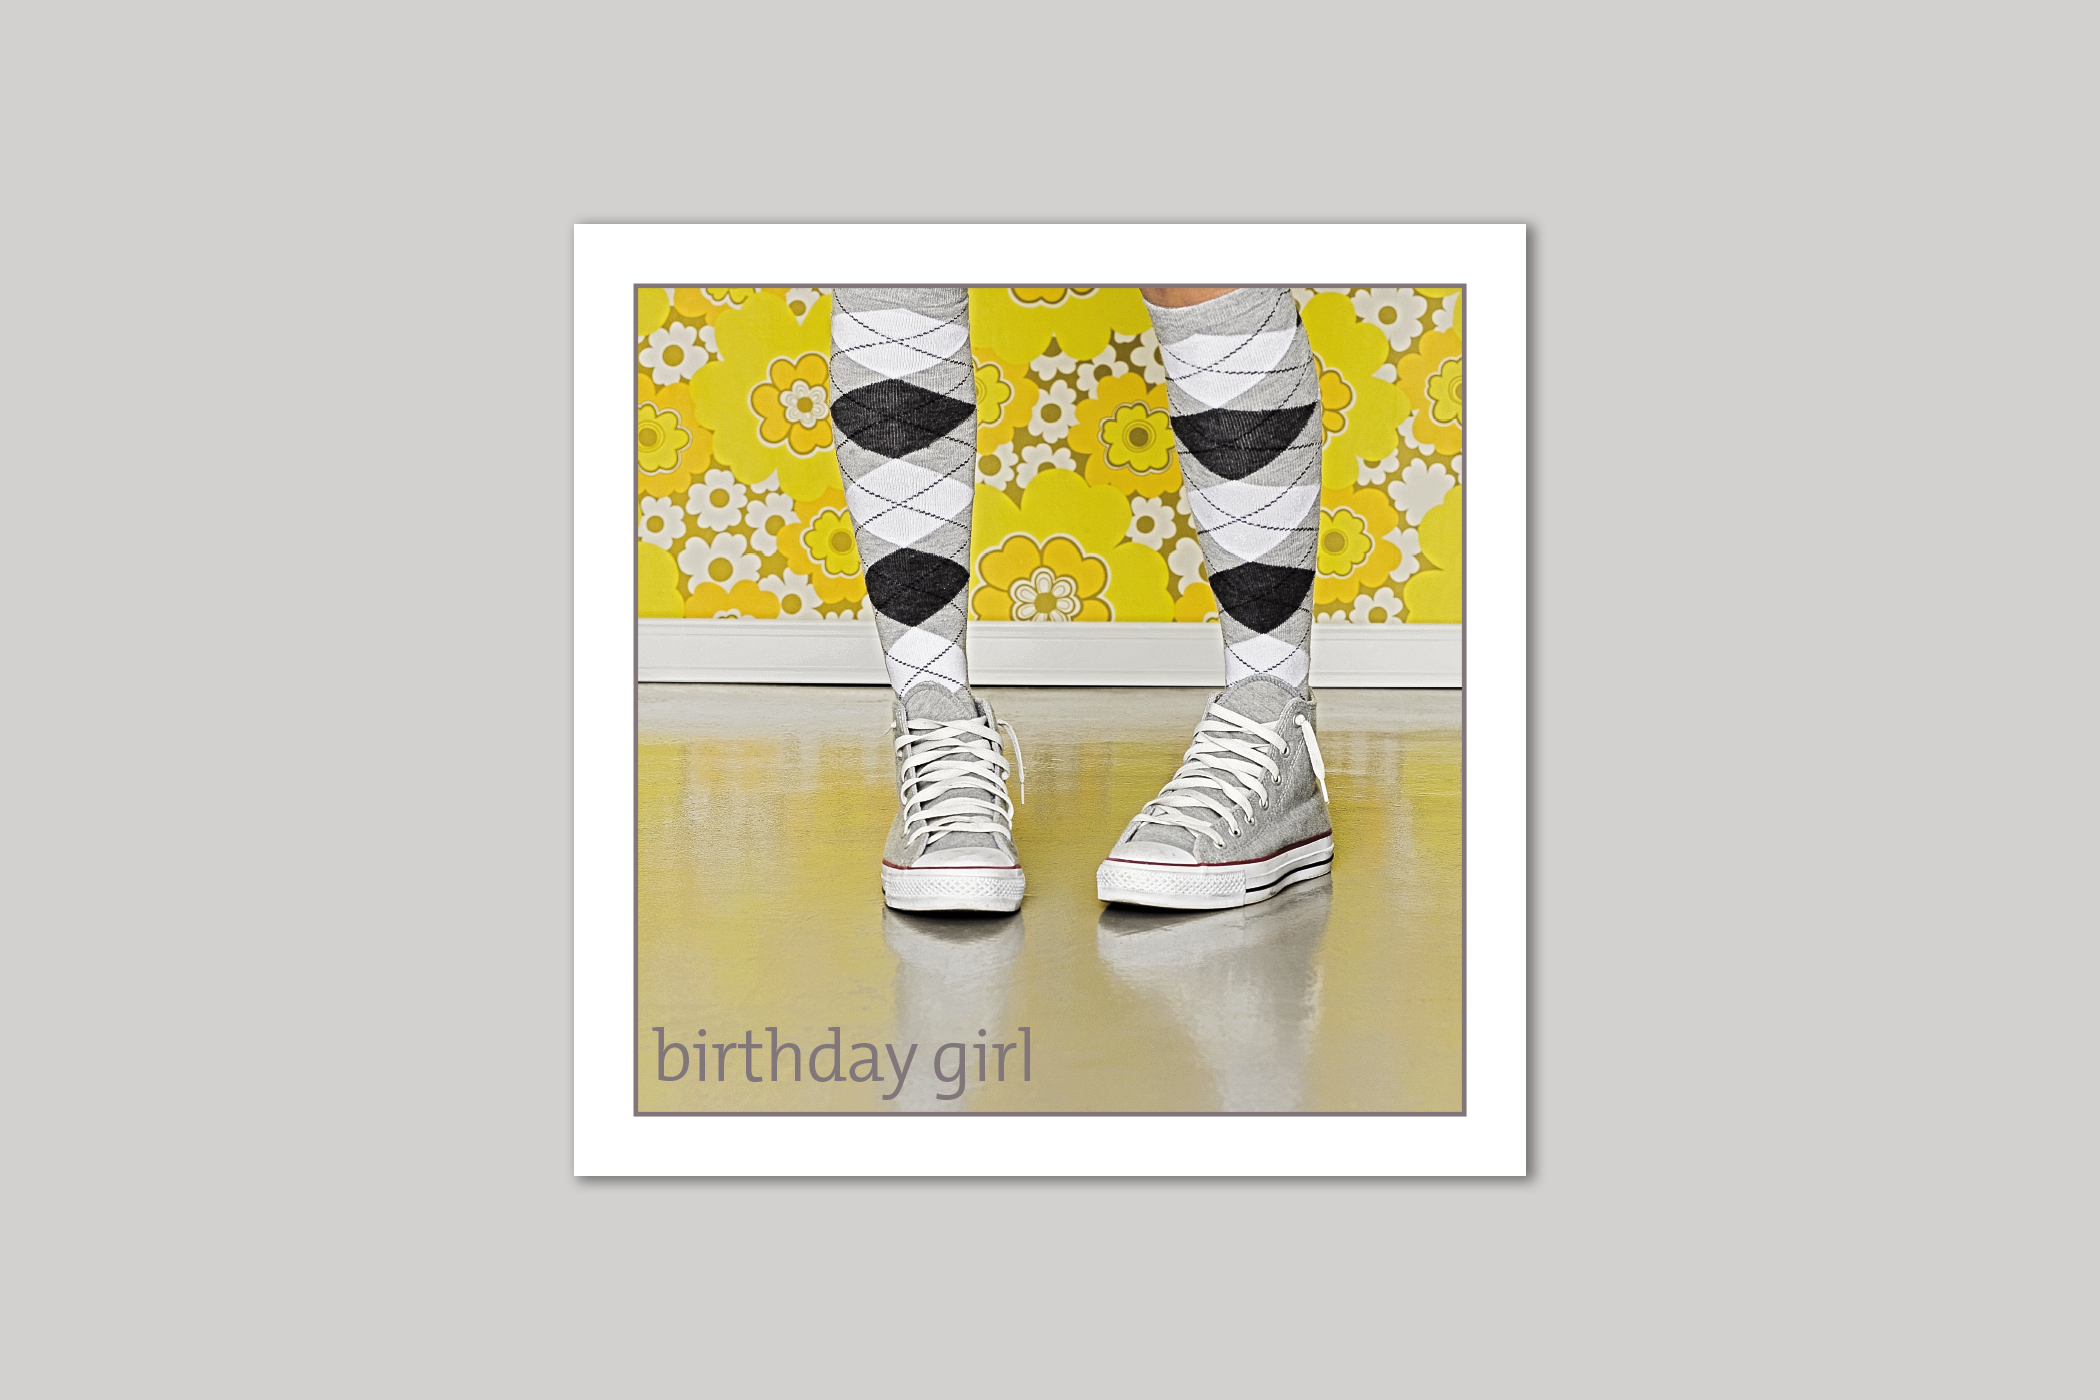 Birthday Girl from Exposure Silver Edition range of greeting cards by Icon.